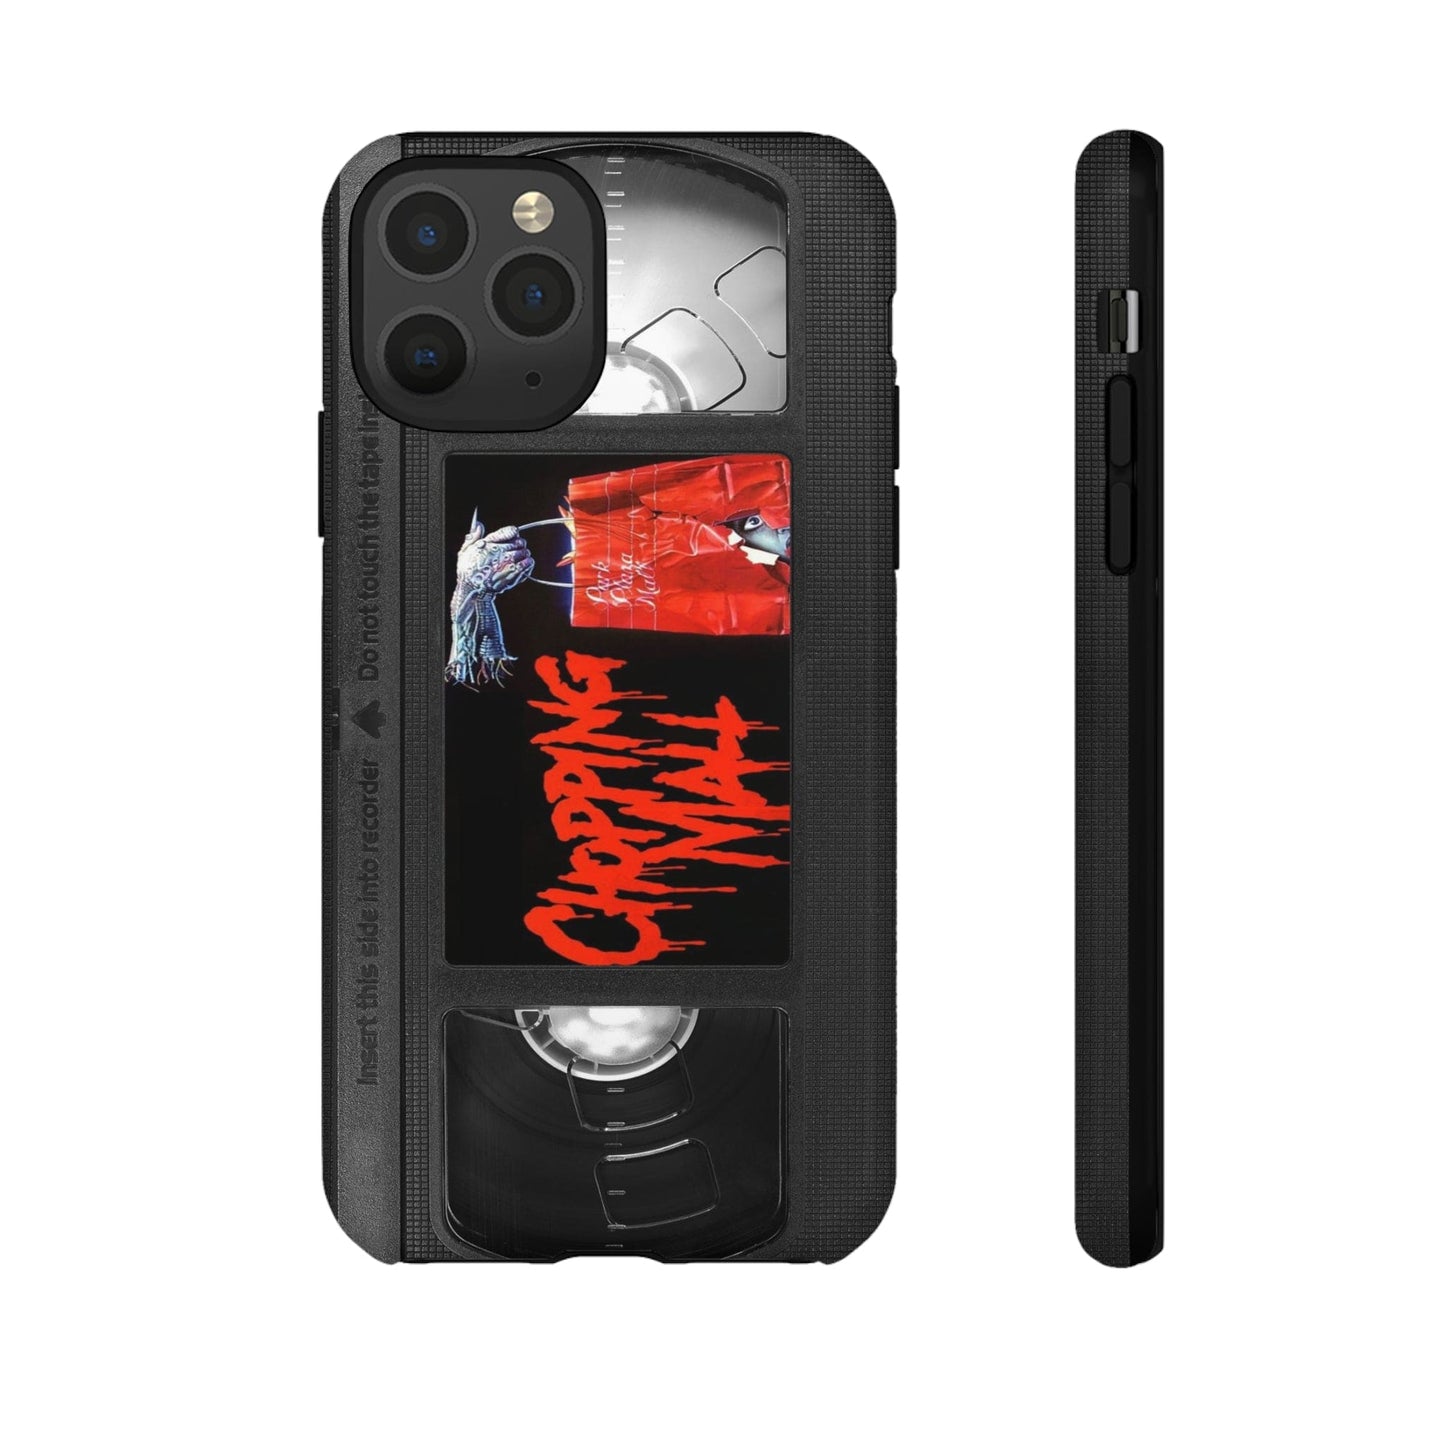 Chopping Mall Impact Resistant VHS Phone Case